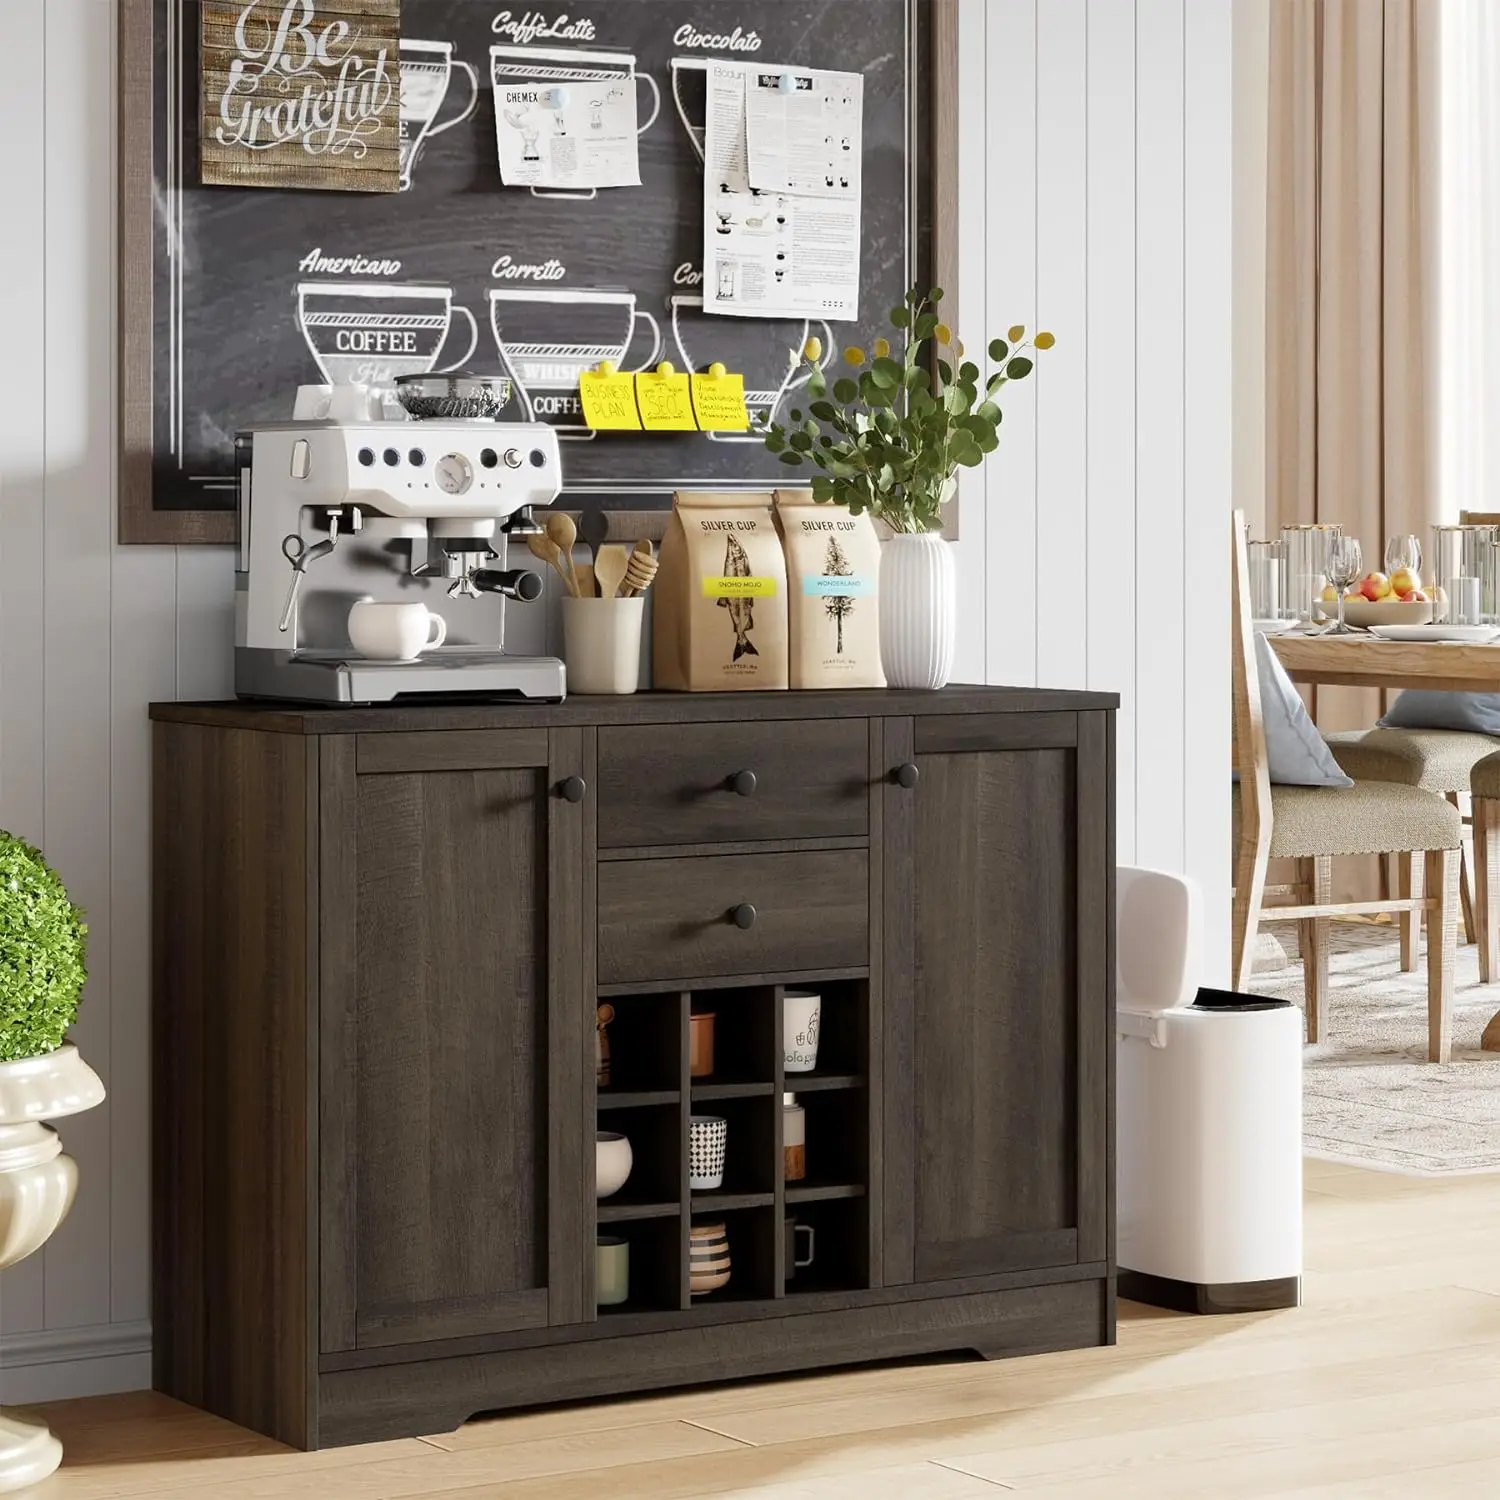 

Buffet Sideboard Bar Cabinet with Storage, Farmhouse Coffee Bar Cabinet with 2 Drawers and Adjustable Shelves,